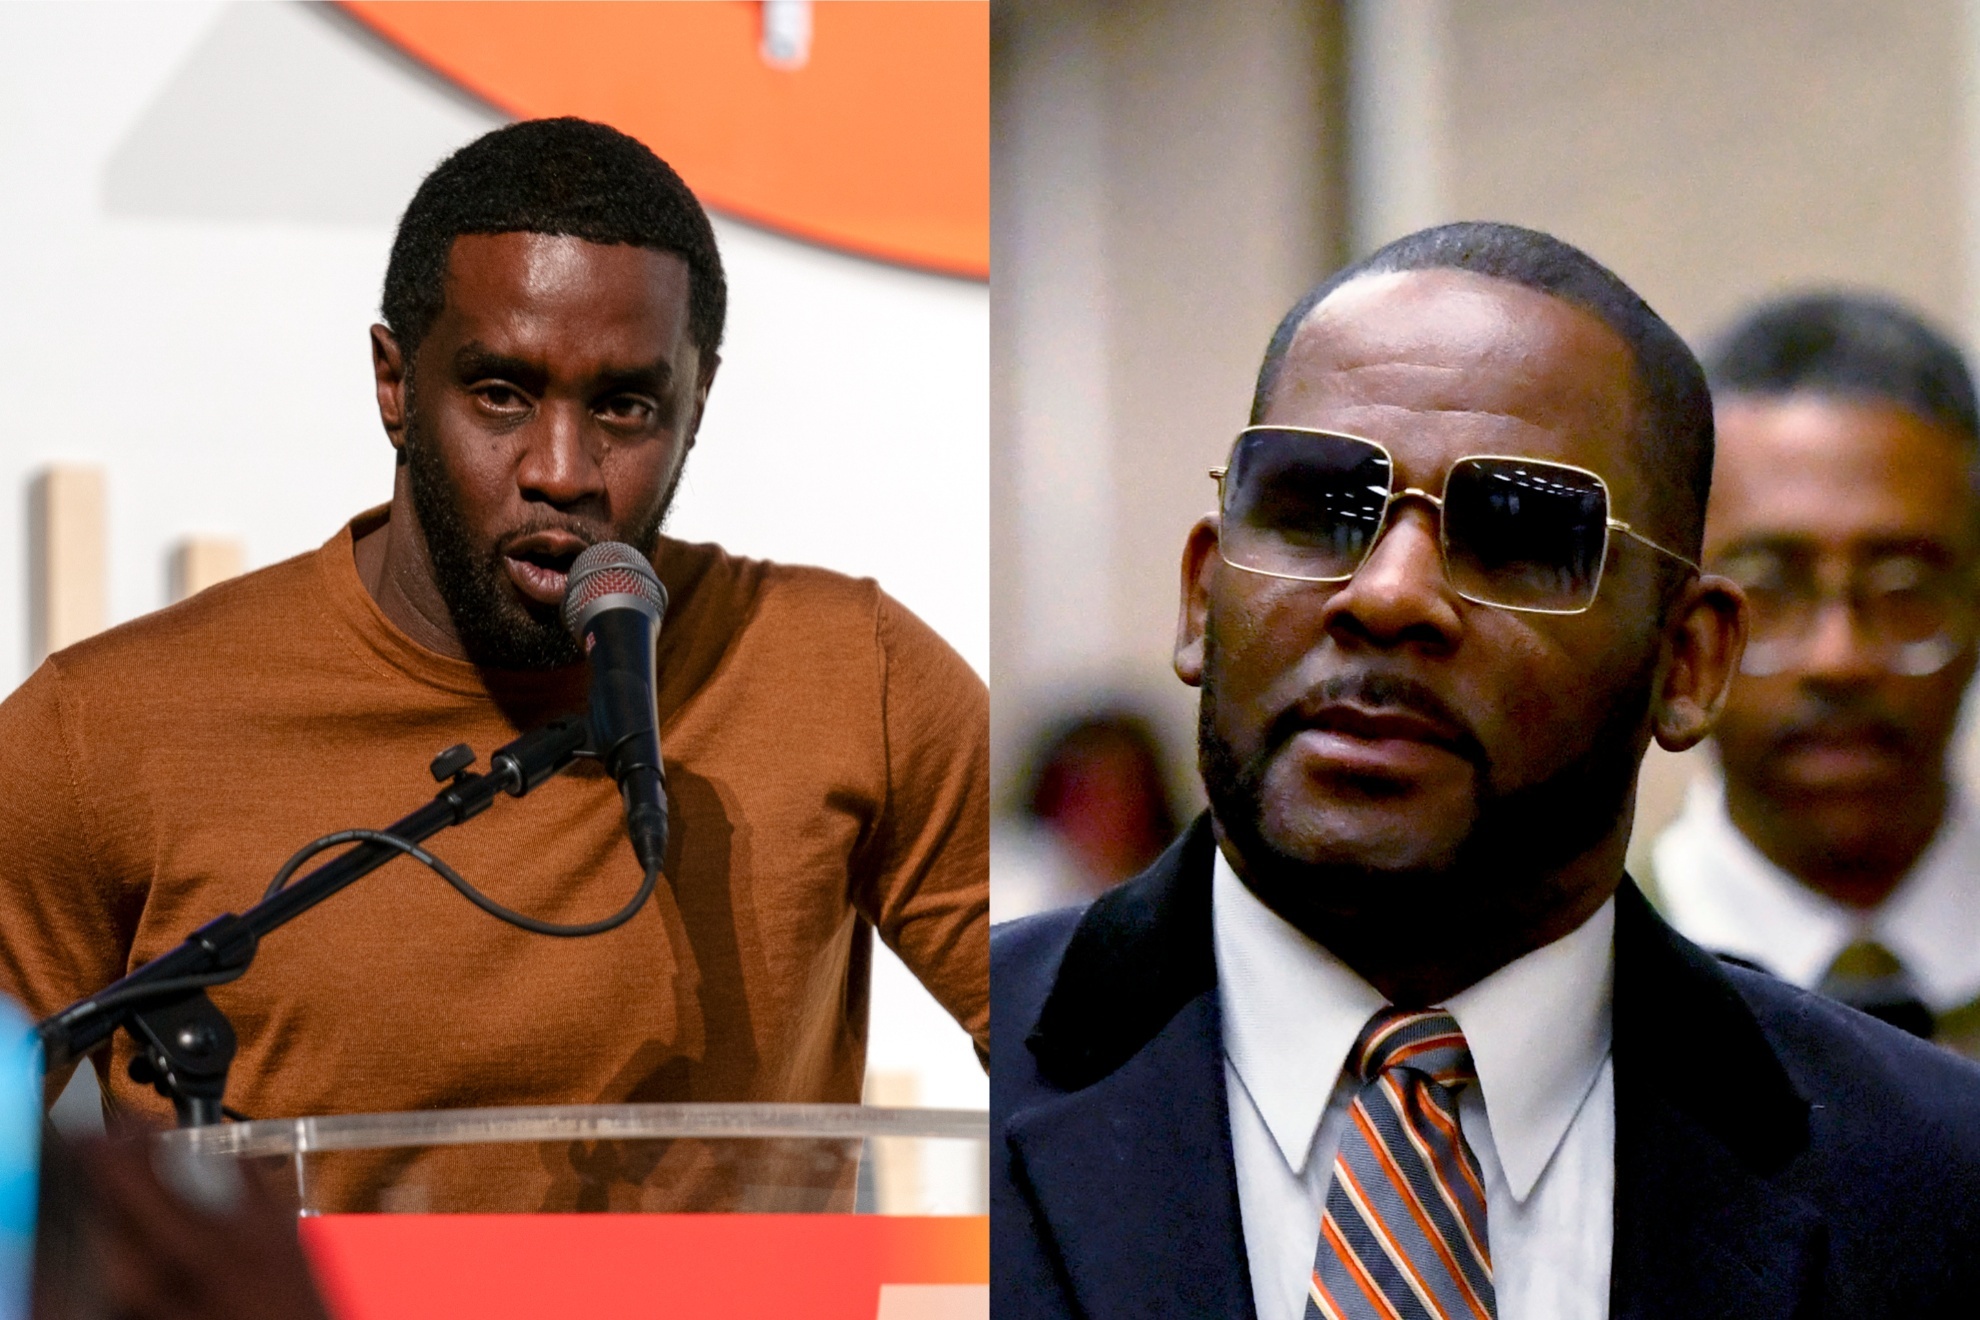 Mashup image of P. Diddy and R. Kelly